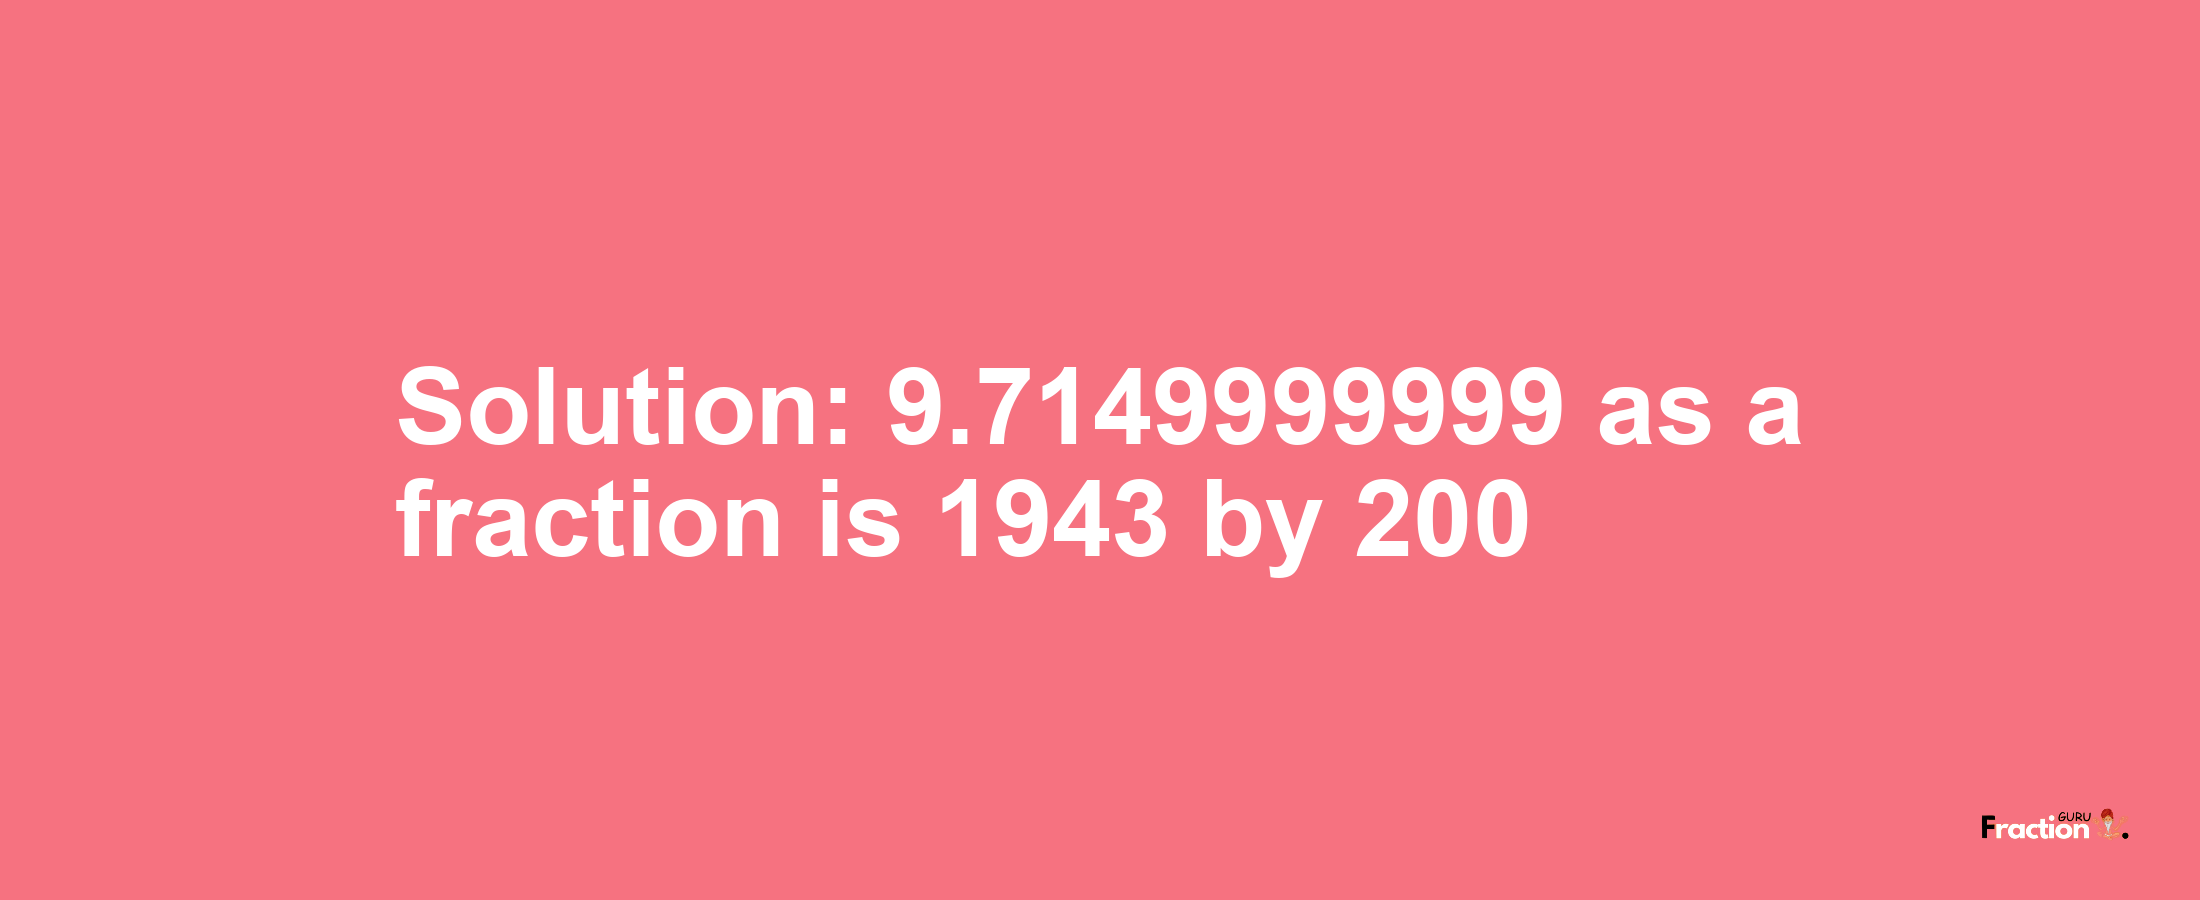 Solution:9.7149999999 as a fraction is 1943/200